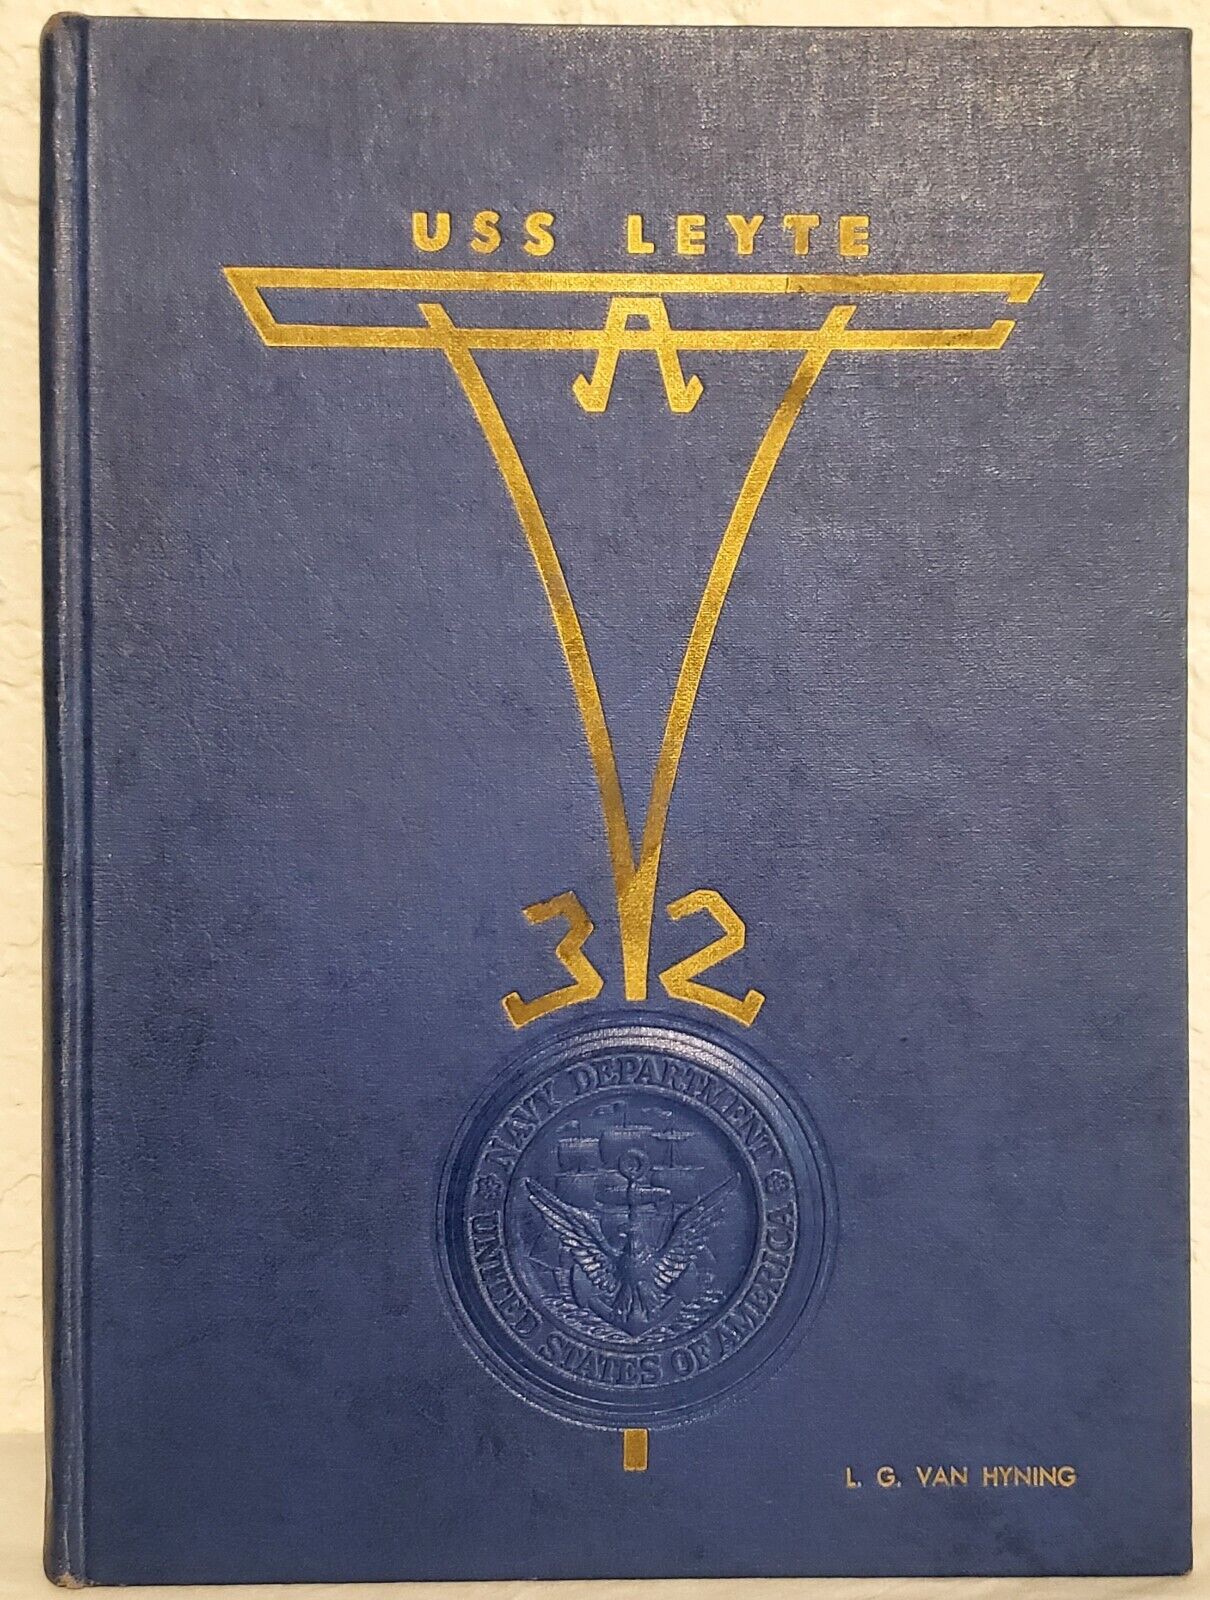 The Officers and Men Of The USS Leyte (CVA-32) 1952 1953 Deployment Cruise Book